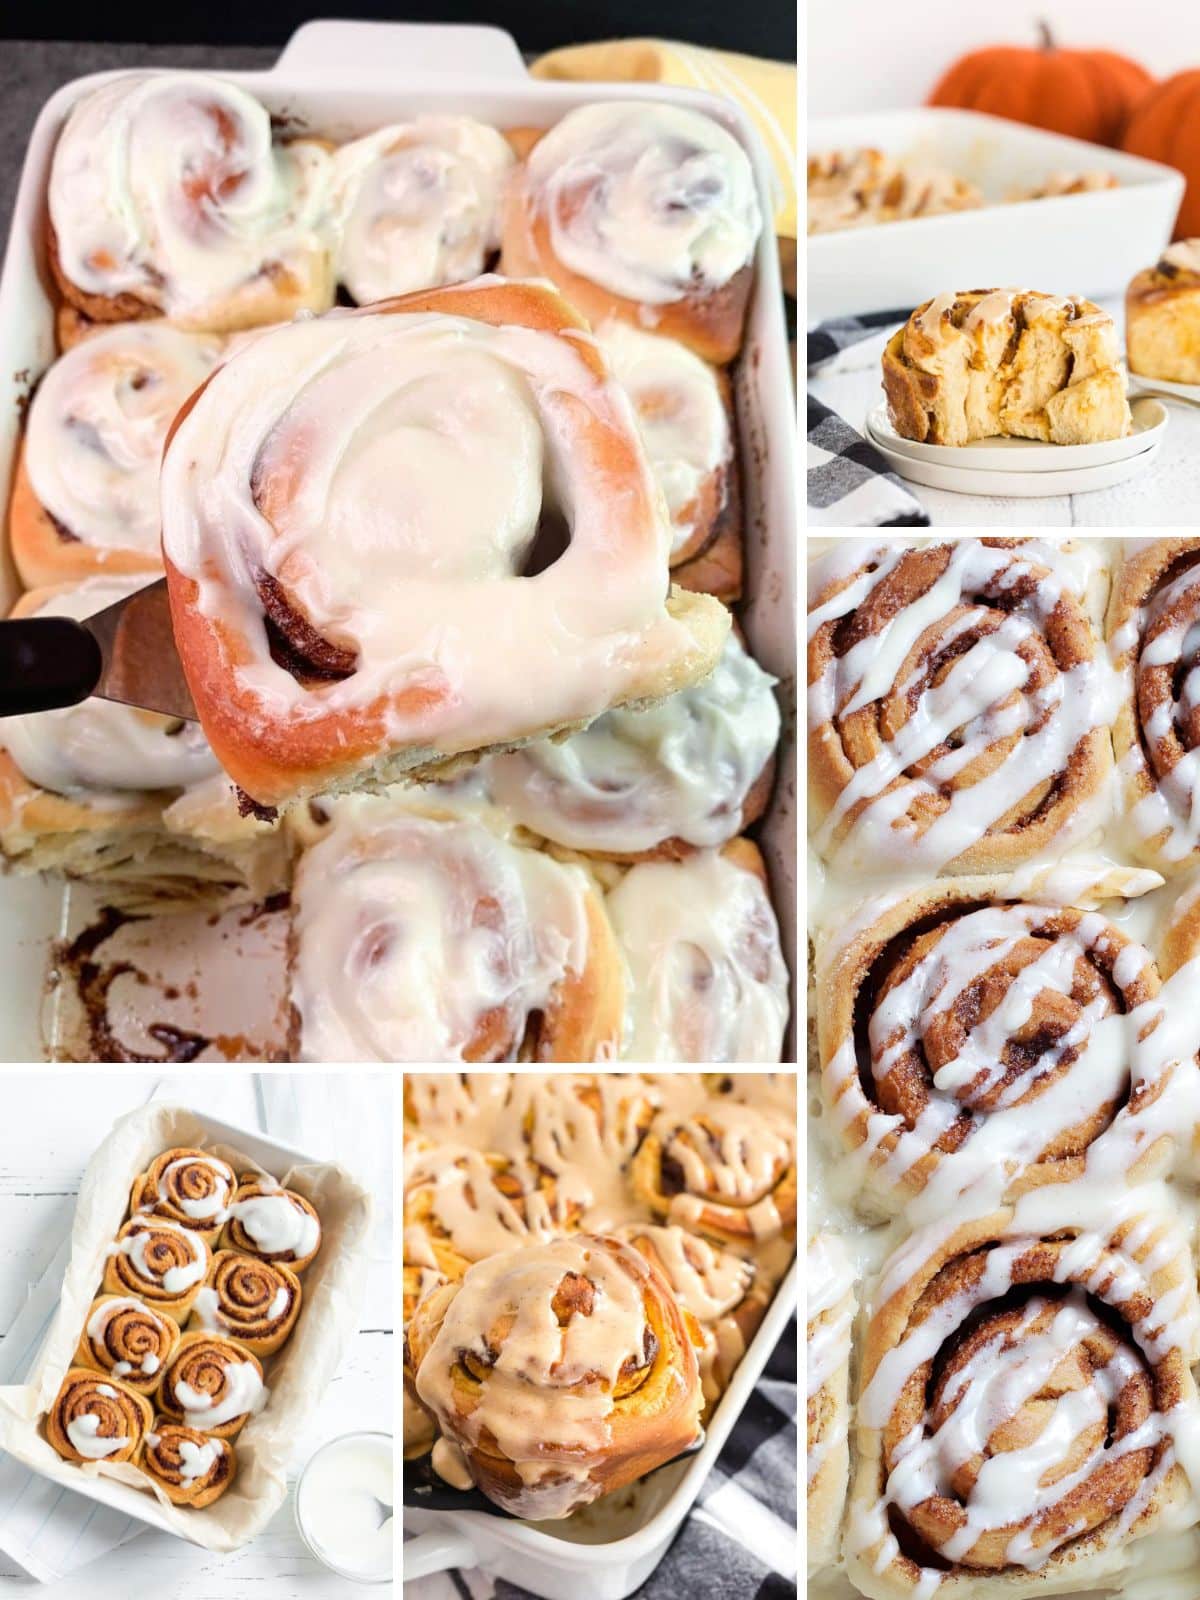 Collection of cinnamon rolls all made using a bread machine.